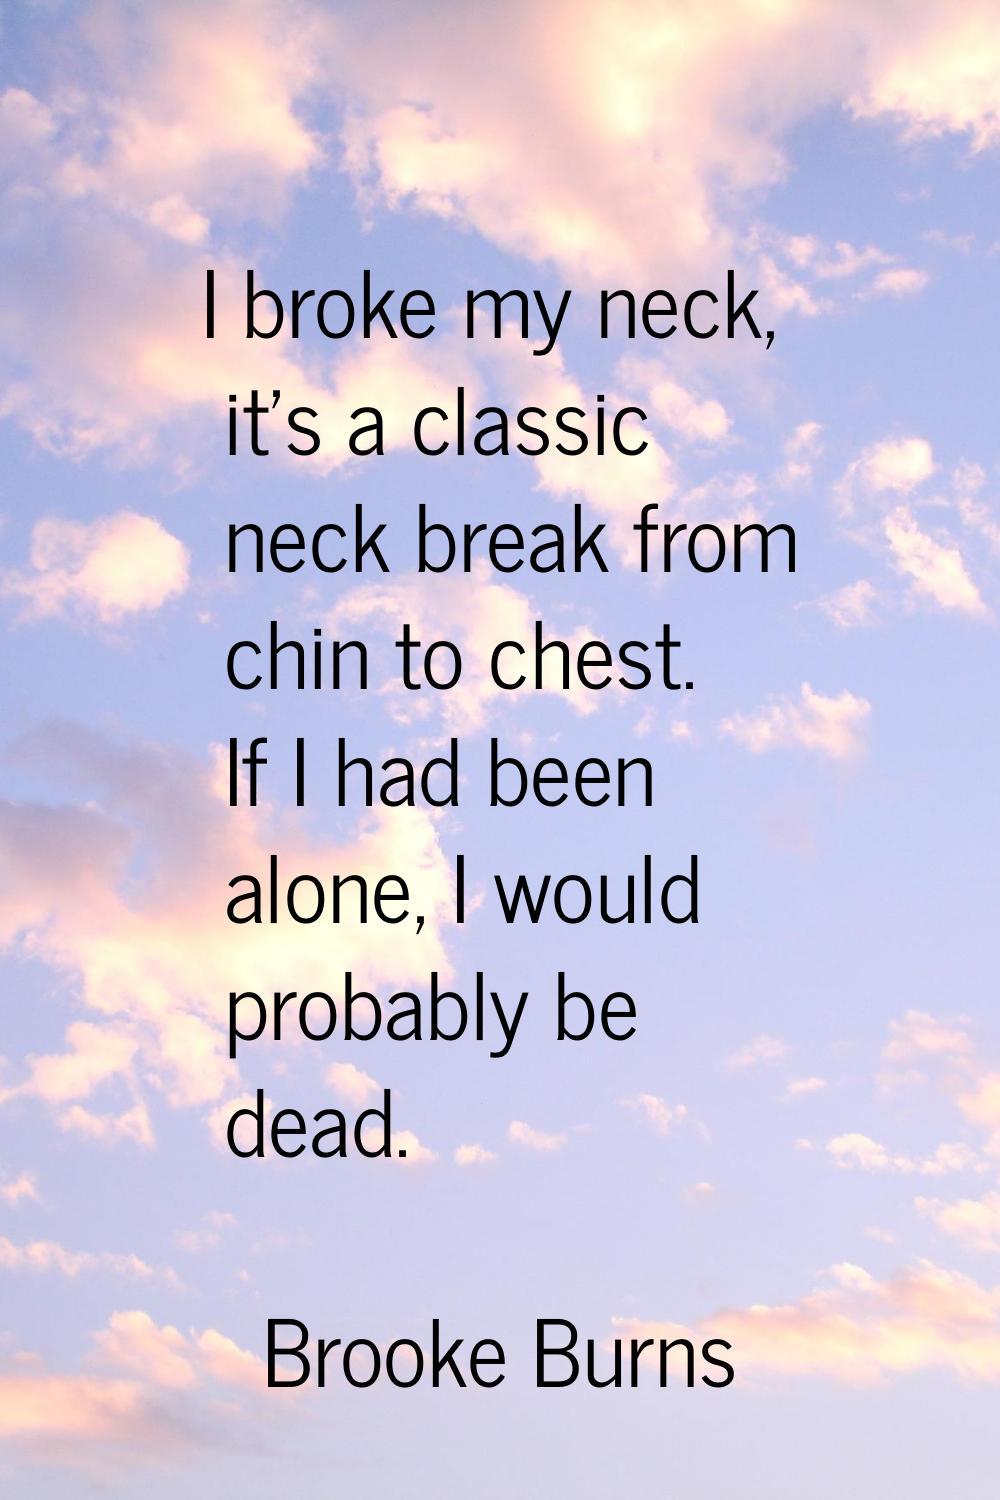 I broke my neck, it's a classic neck break from chin to chest. If I had been alone, I would probabl